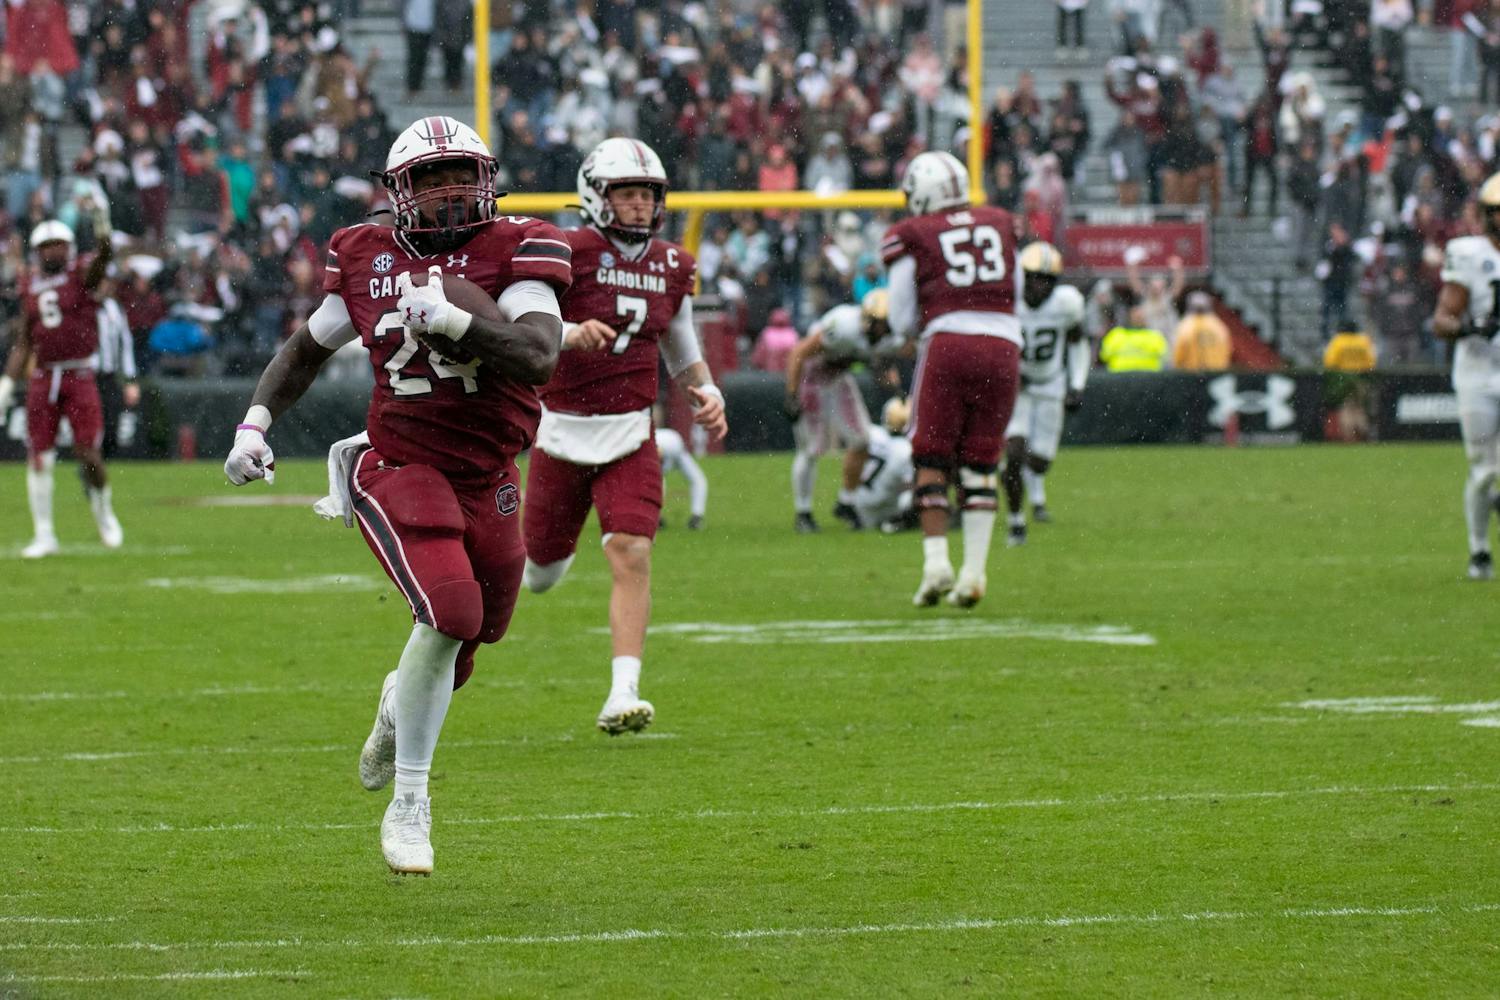 The South Carolina Gamecocks faced the Vanderbilt Commodores at Williams-Brice Stadium on Nov. 11, 2023. The Gamecocks commanded a 47-6 victory, putting the team at 4-6 on the 鶹С򽴫ý. The Gamecocks totaled 487 yards to the Commodores' 234.